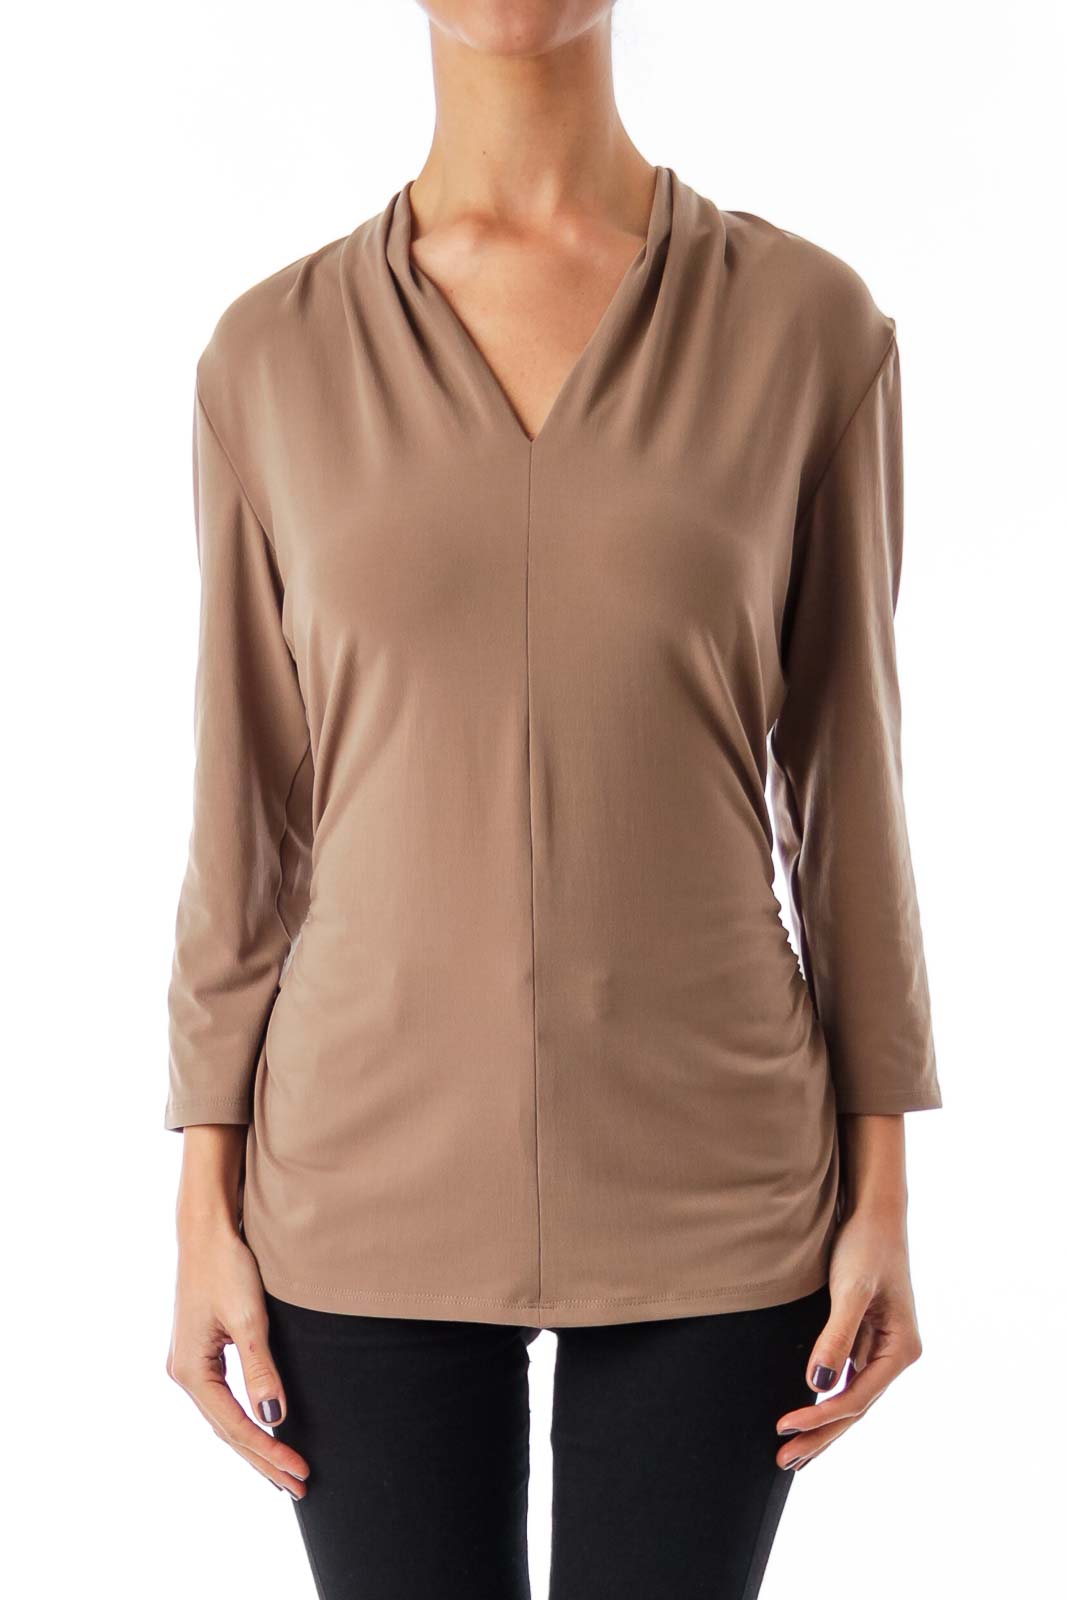 Taupe Stretch V-neck Top Front